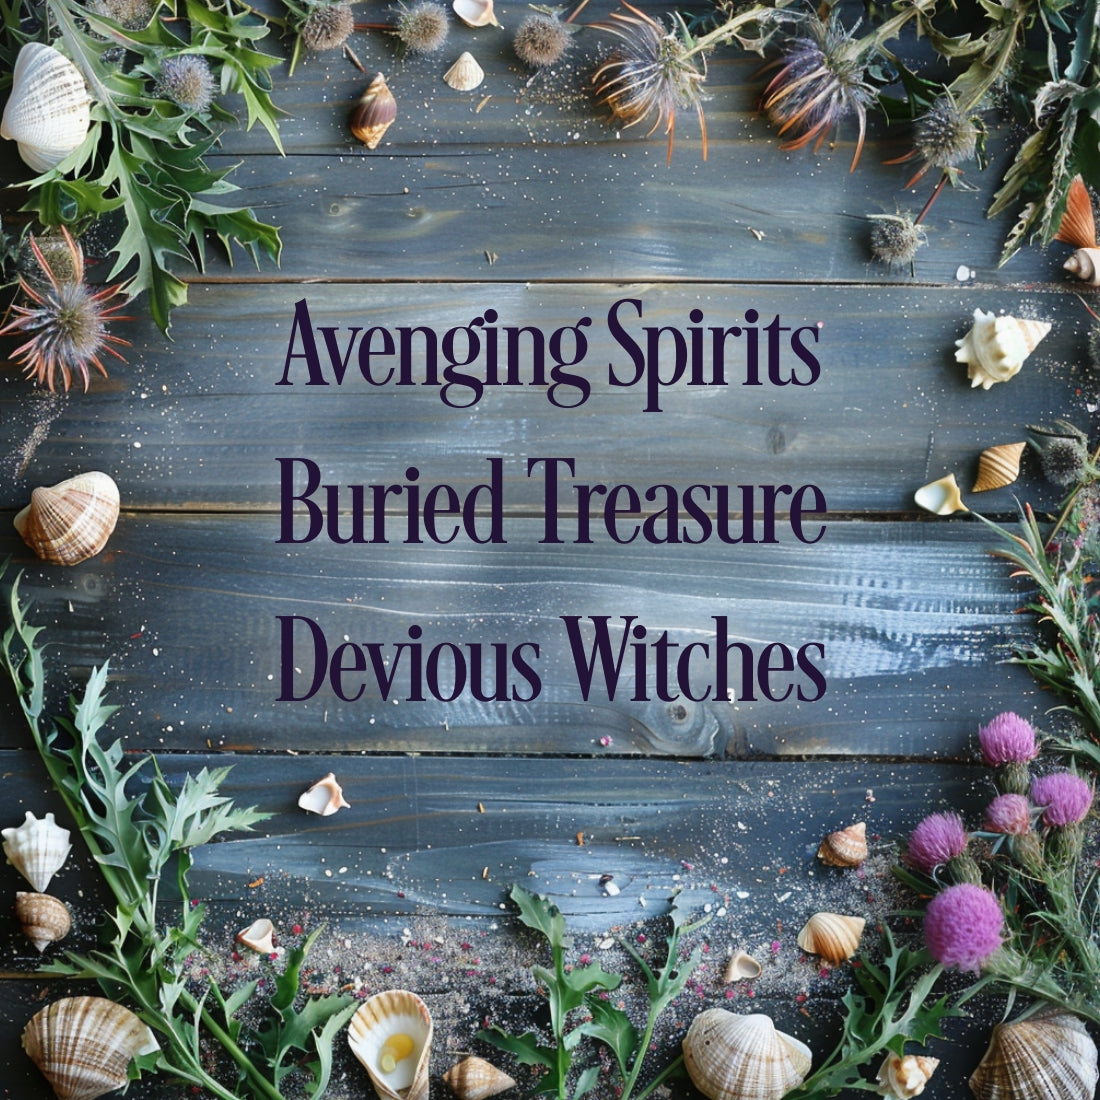 Vengeful Magic, White Haven Witches. Witchcraft, magic, paranormal mystery, urban fantasy, supernatural thriller, occult fiction.